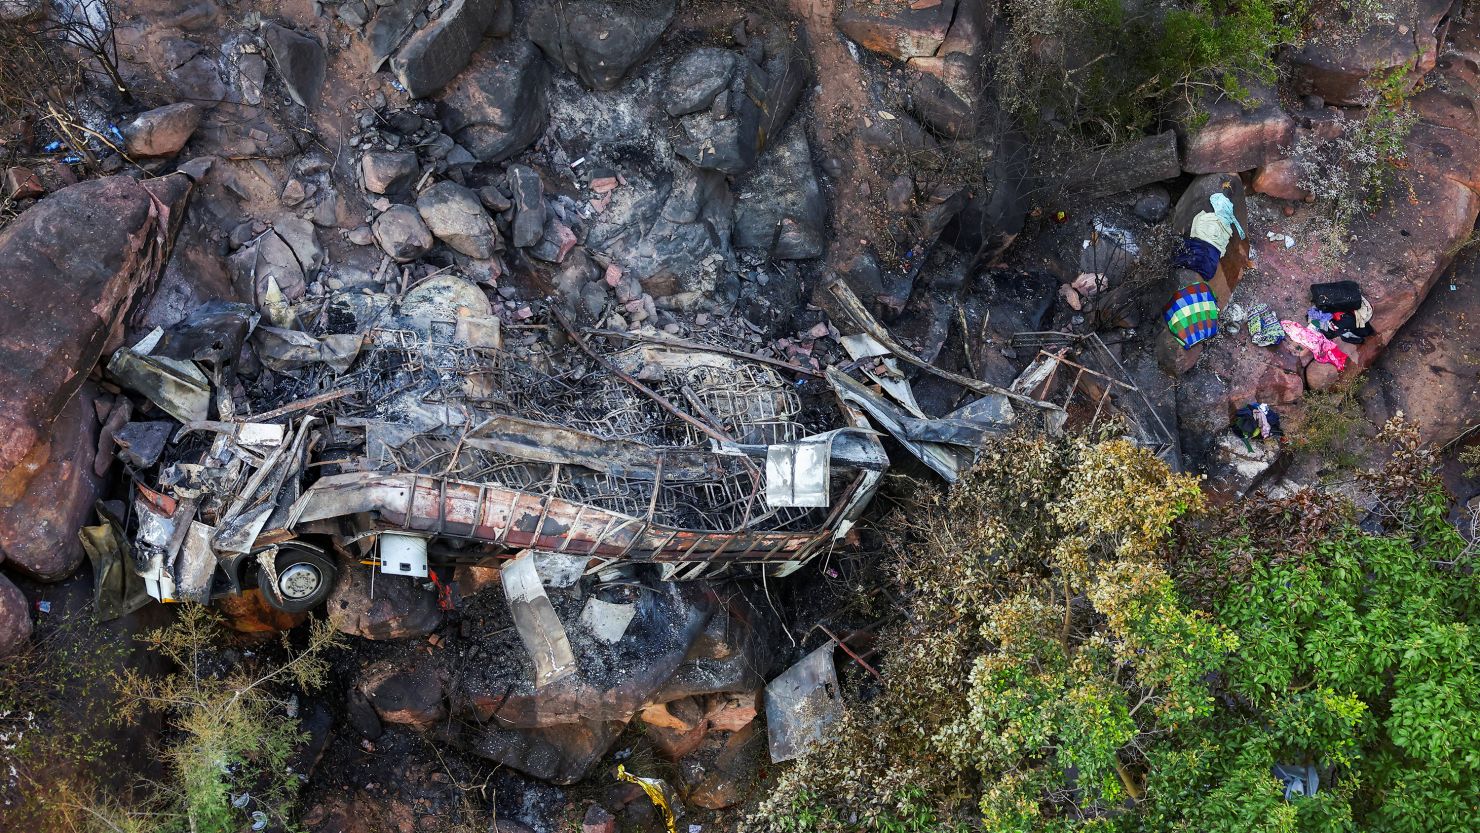 A view of the burnt remains of the bus that was taking Easter pilgrims from Botswana to Moria, following the crash near Mamatlakala in the northern province of Limpopo, South Africa.